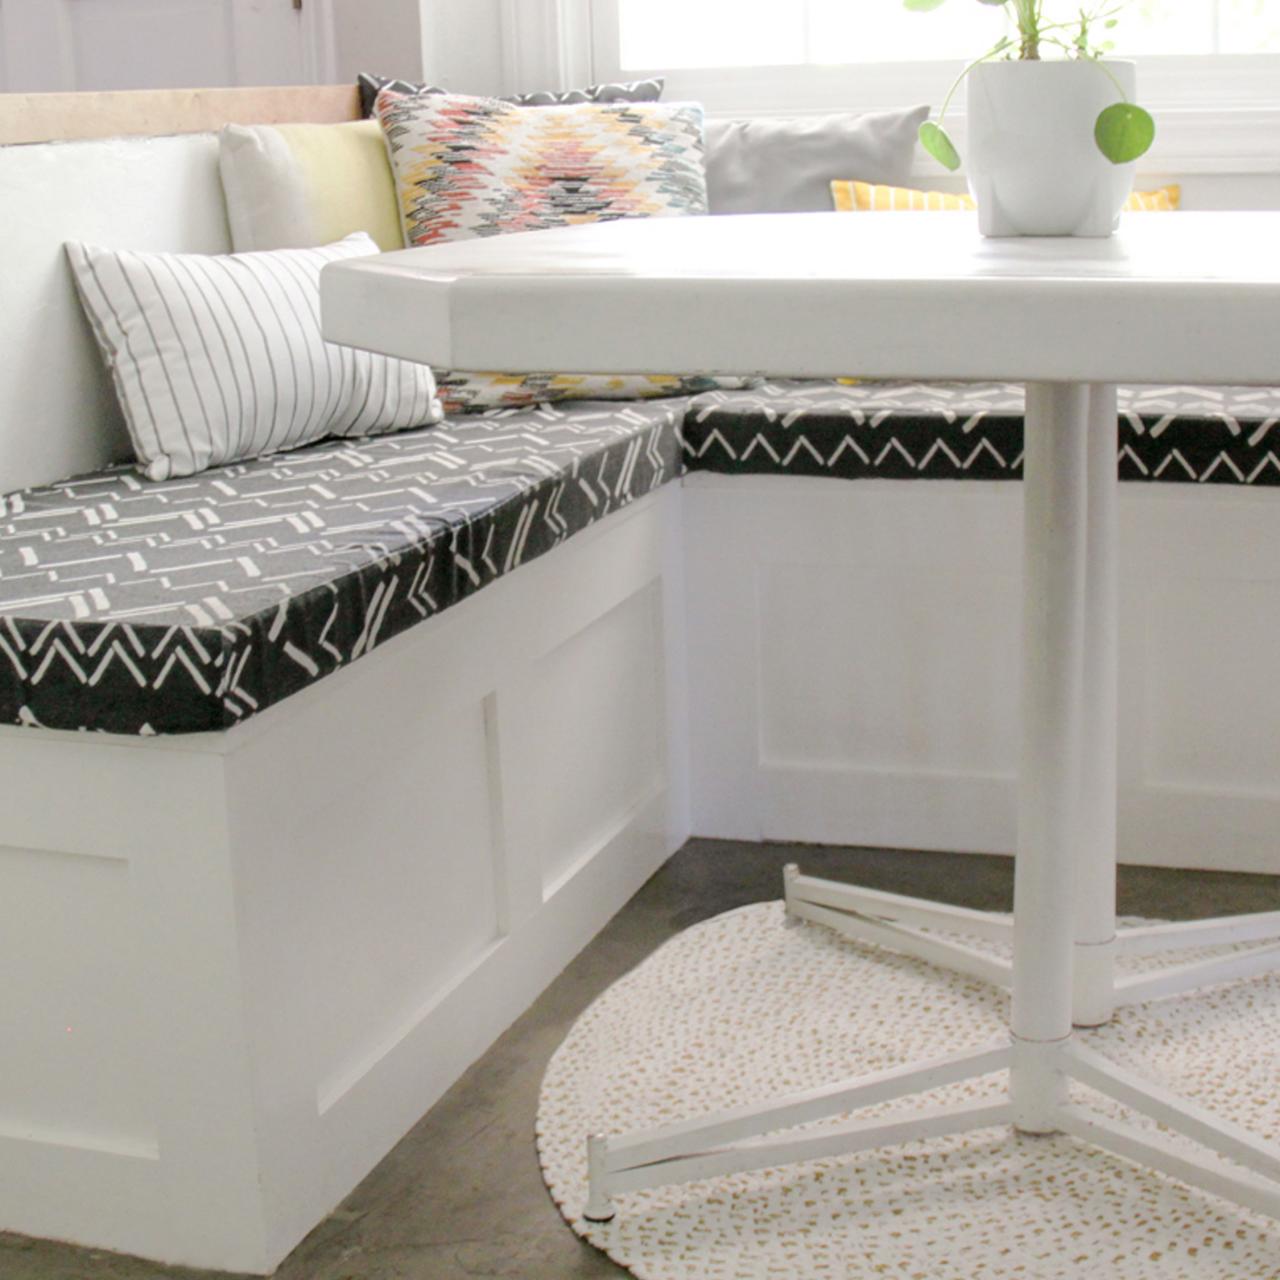 How To Build Diy Banquette Seating With Storage Hgtv